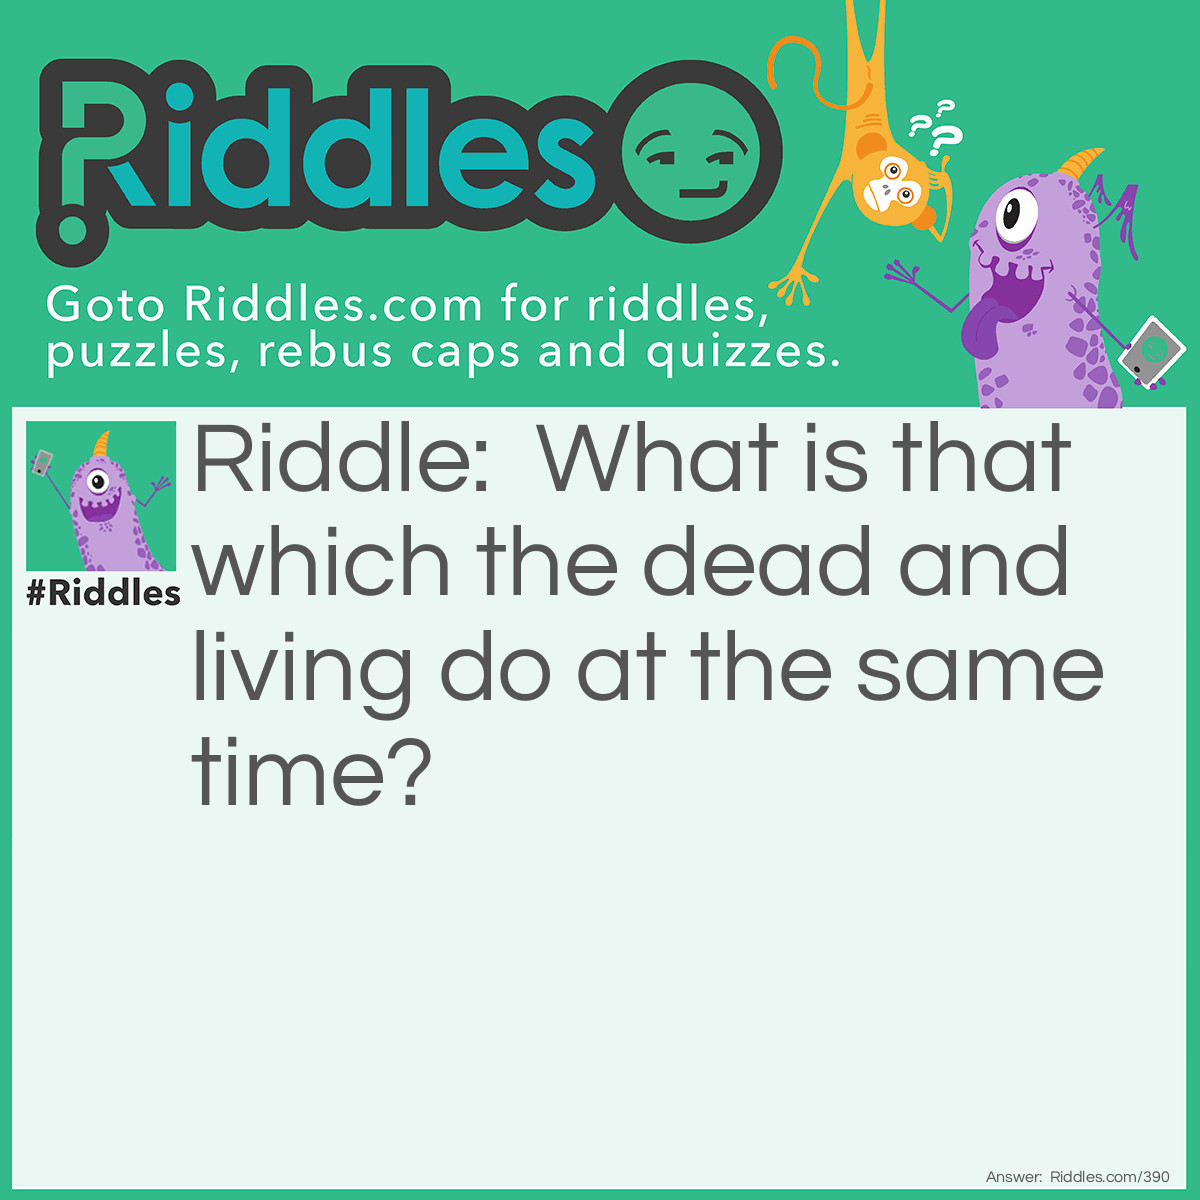 Riddle: What is that which the dead and living do at the same time? Answer: Lie.